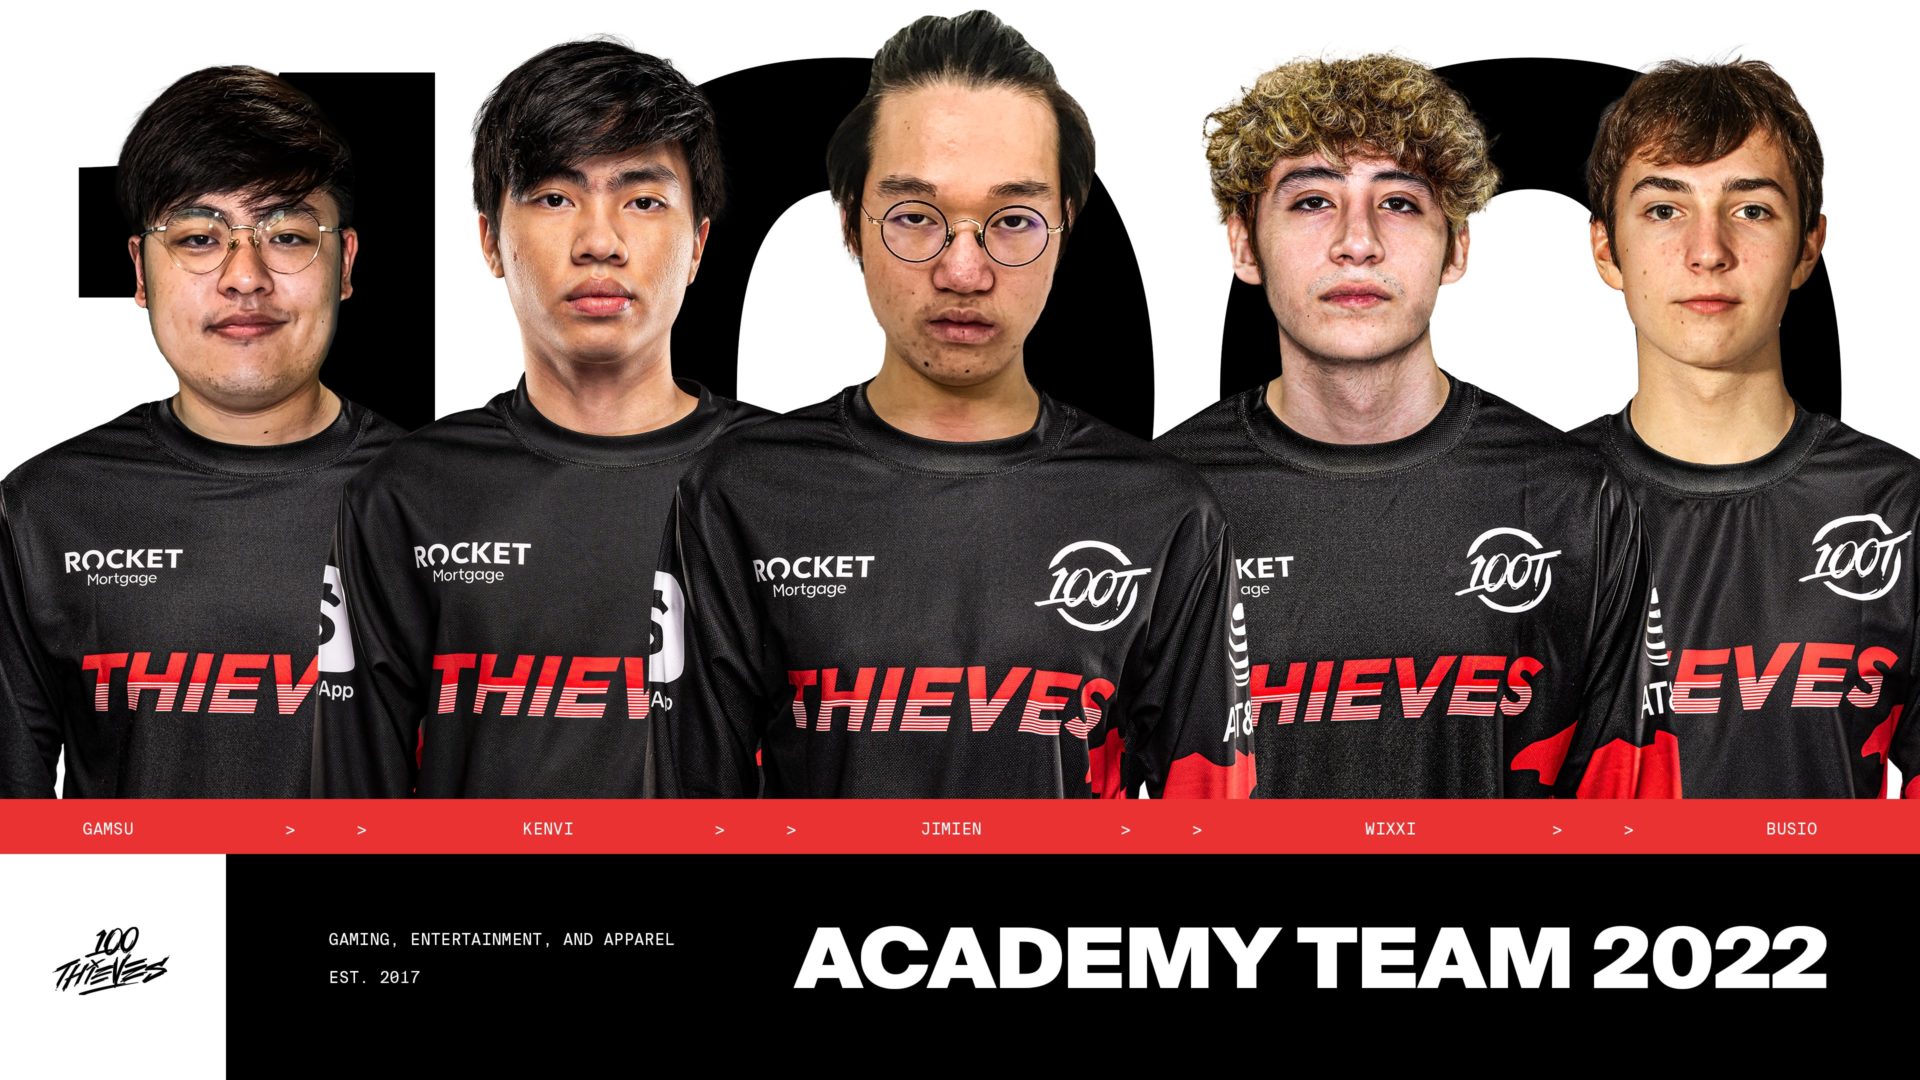 Photo: 100t roster